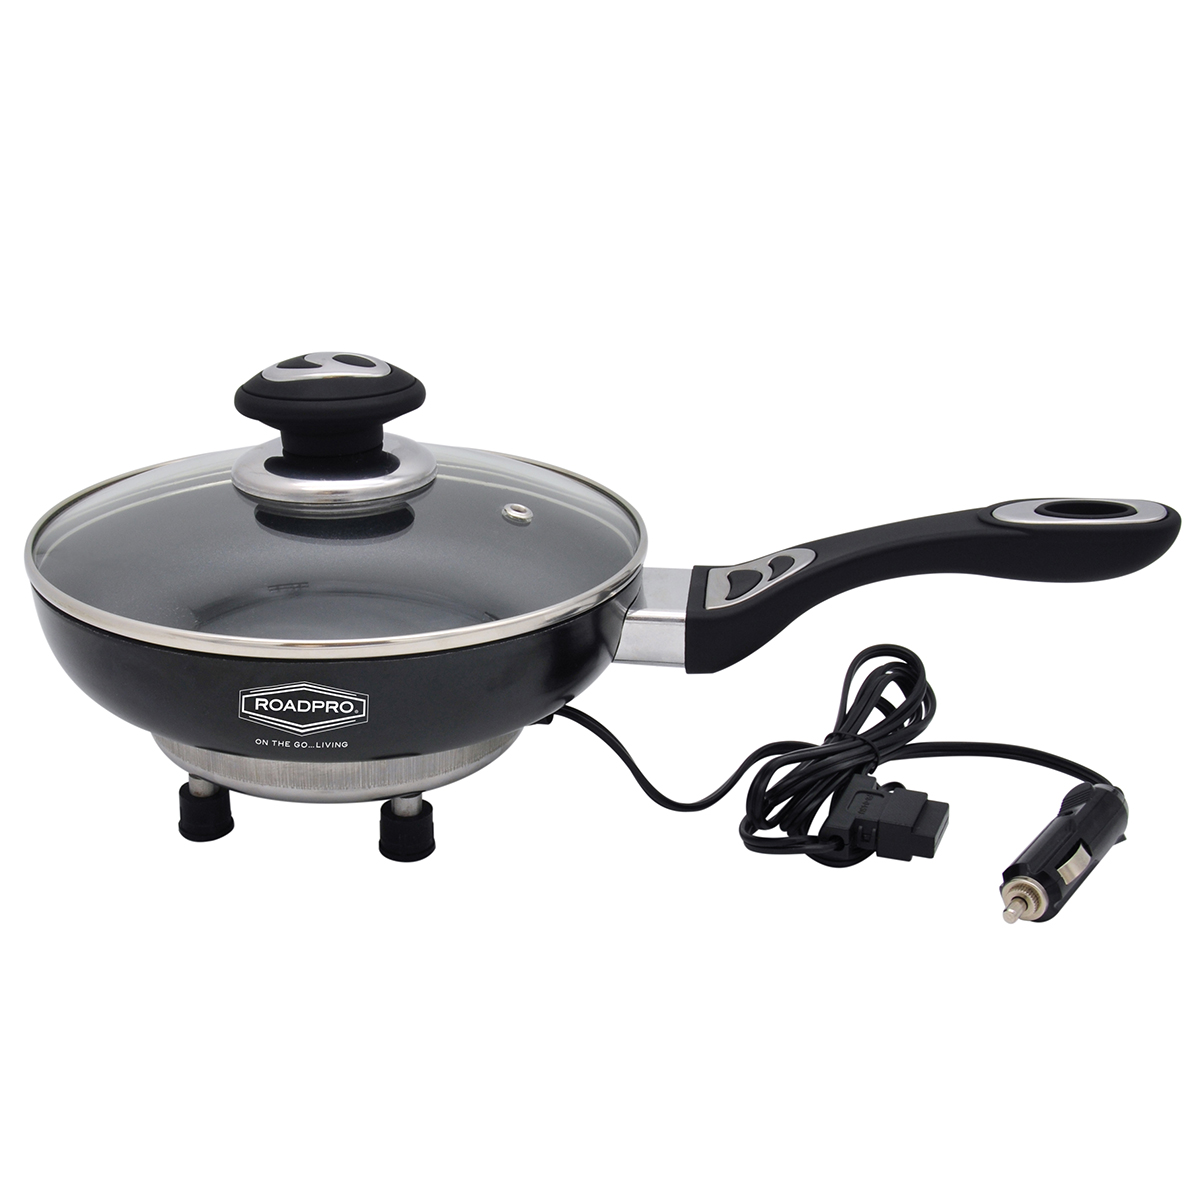 How Many Amps Does An Electric Skillet Use?